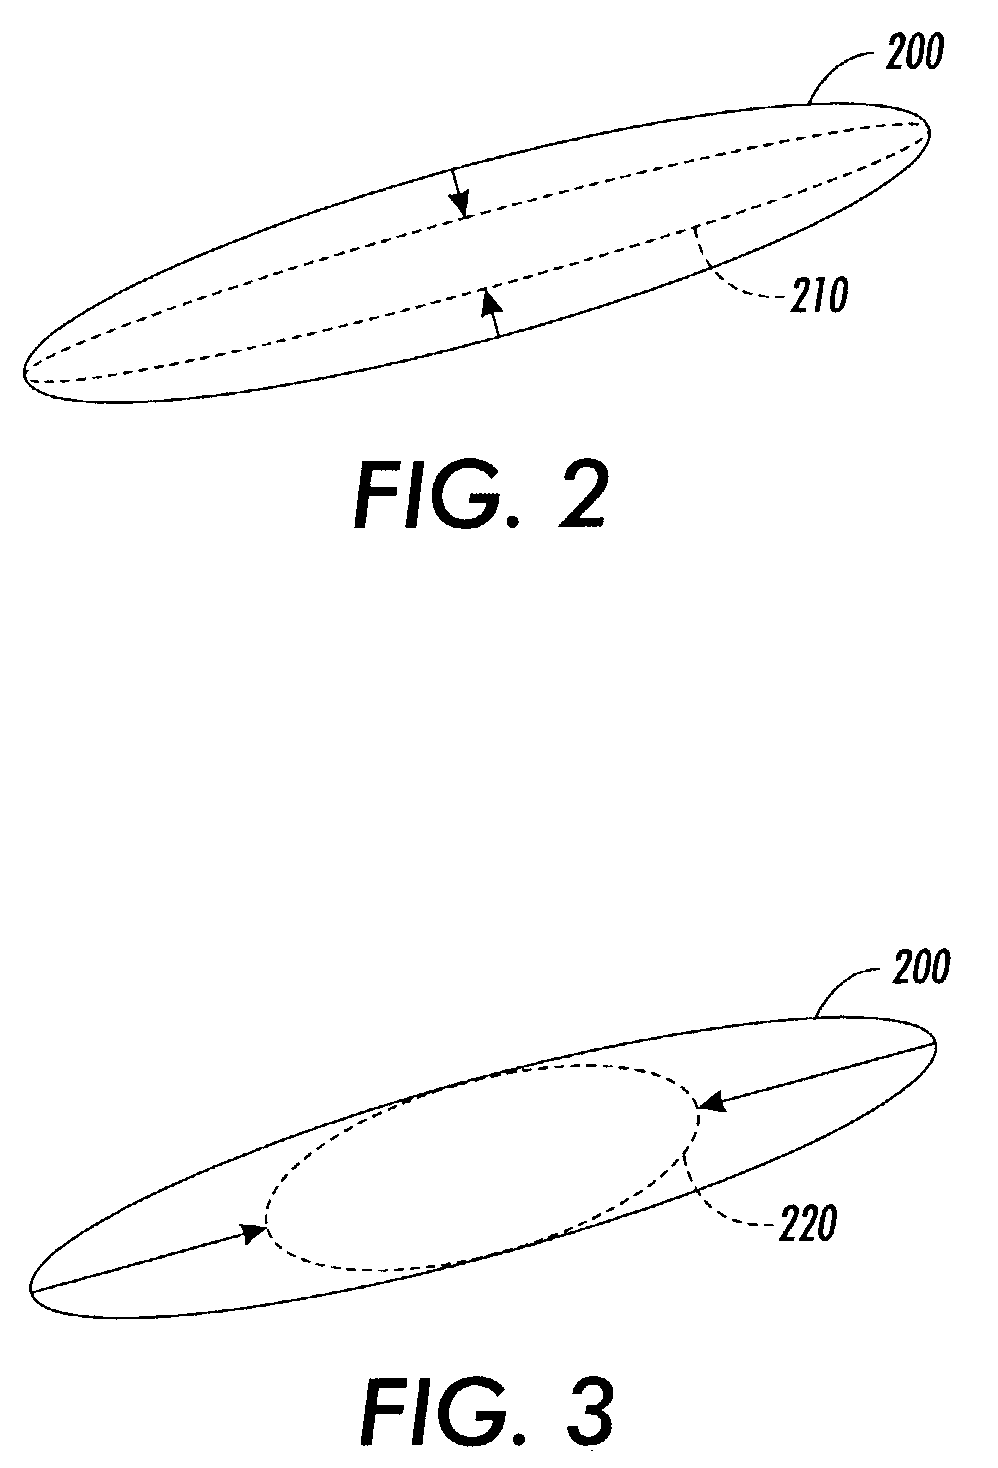 Systems and methods for constrained anisotropic diffusion routing within an ad hoc network